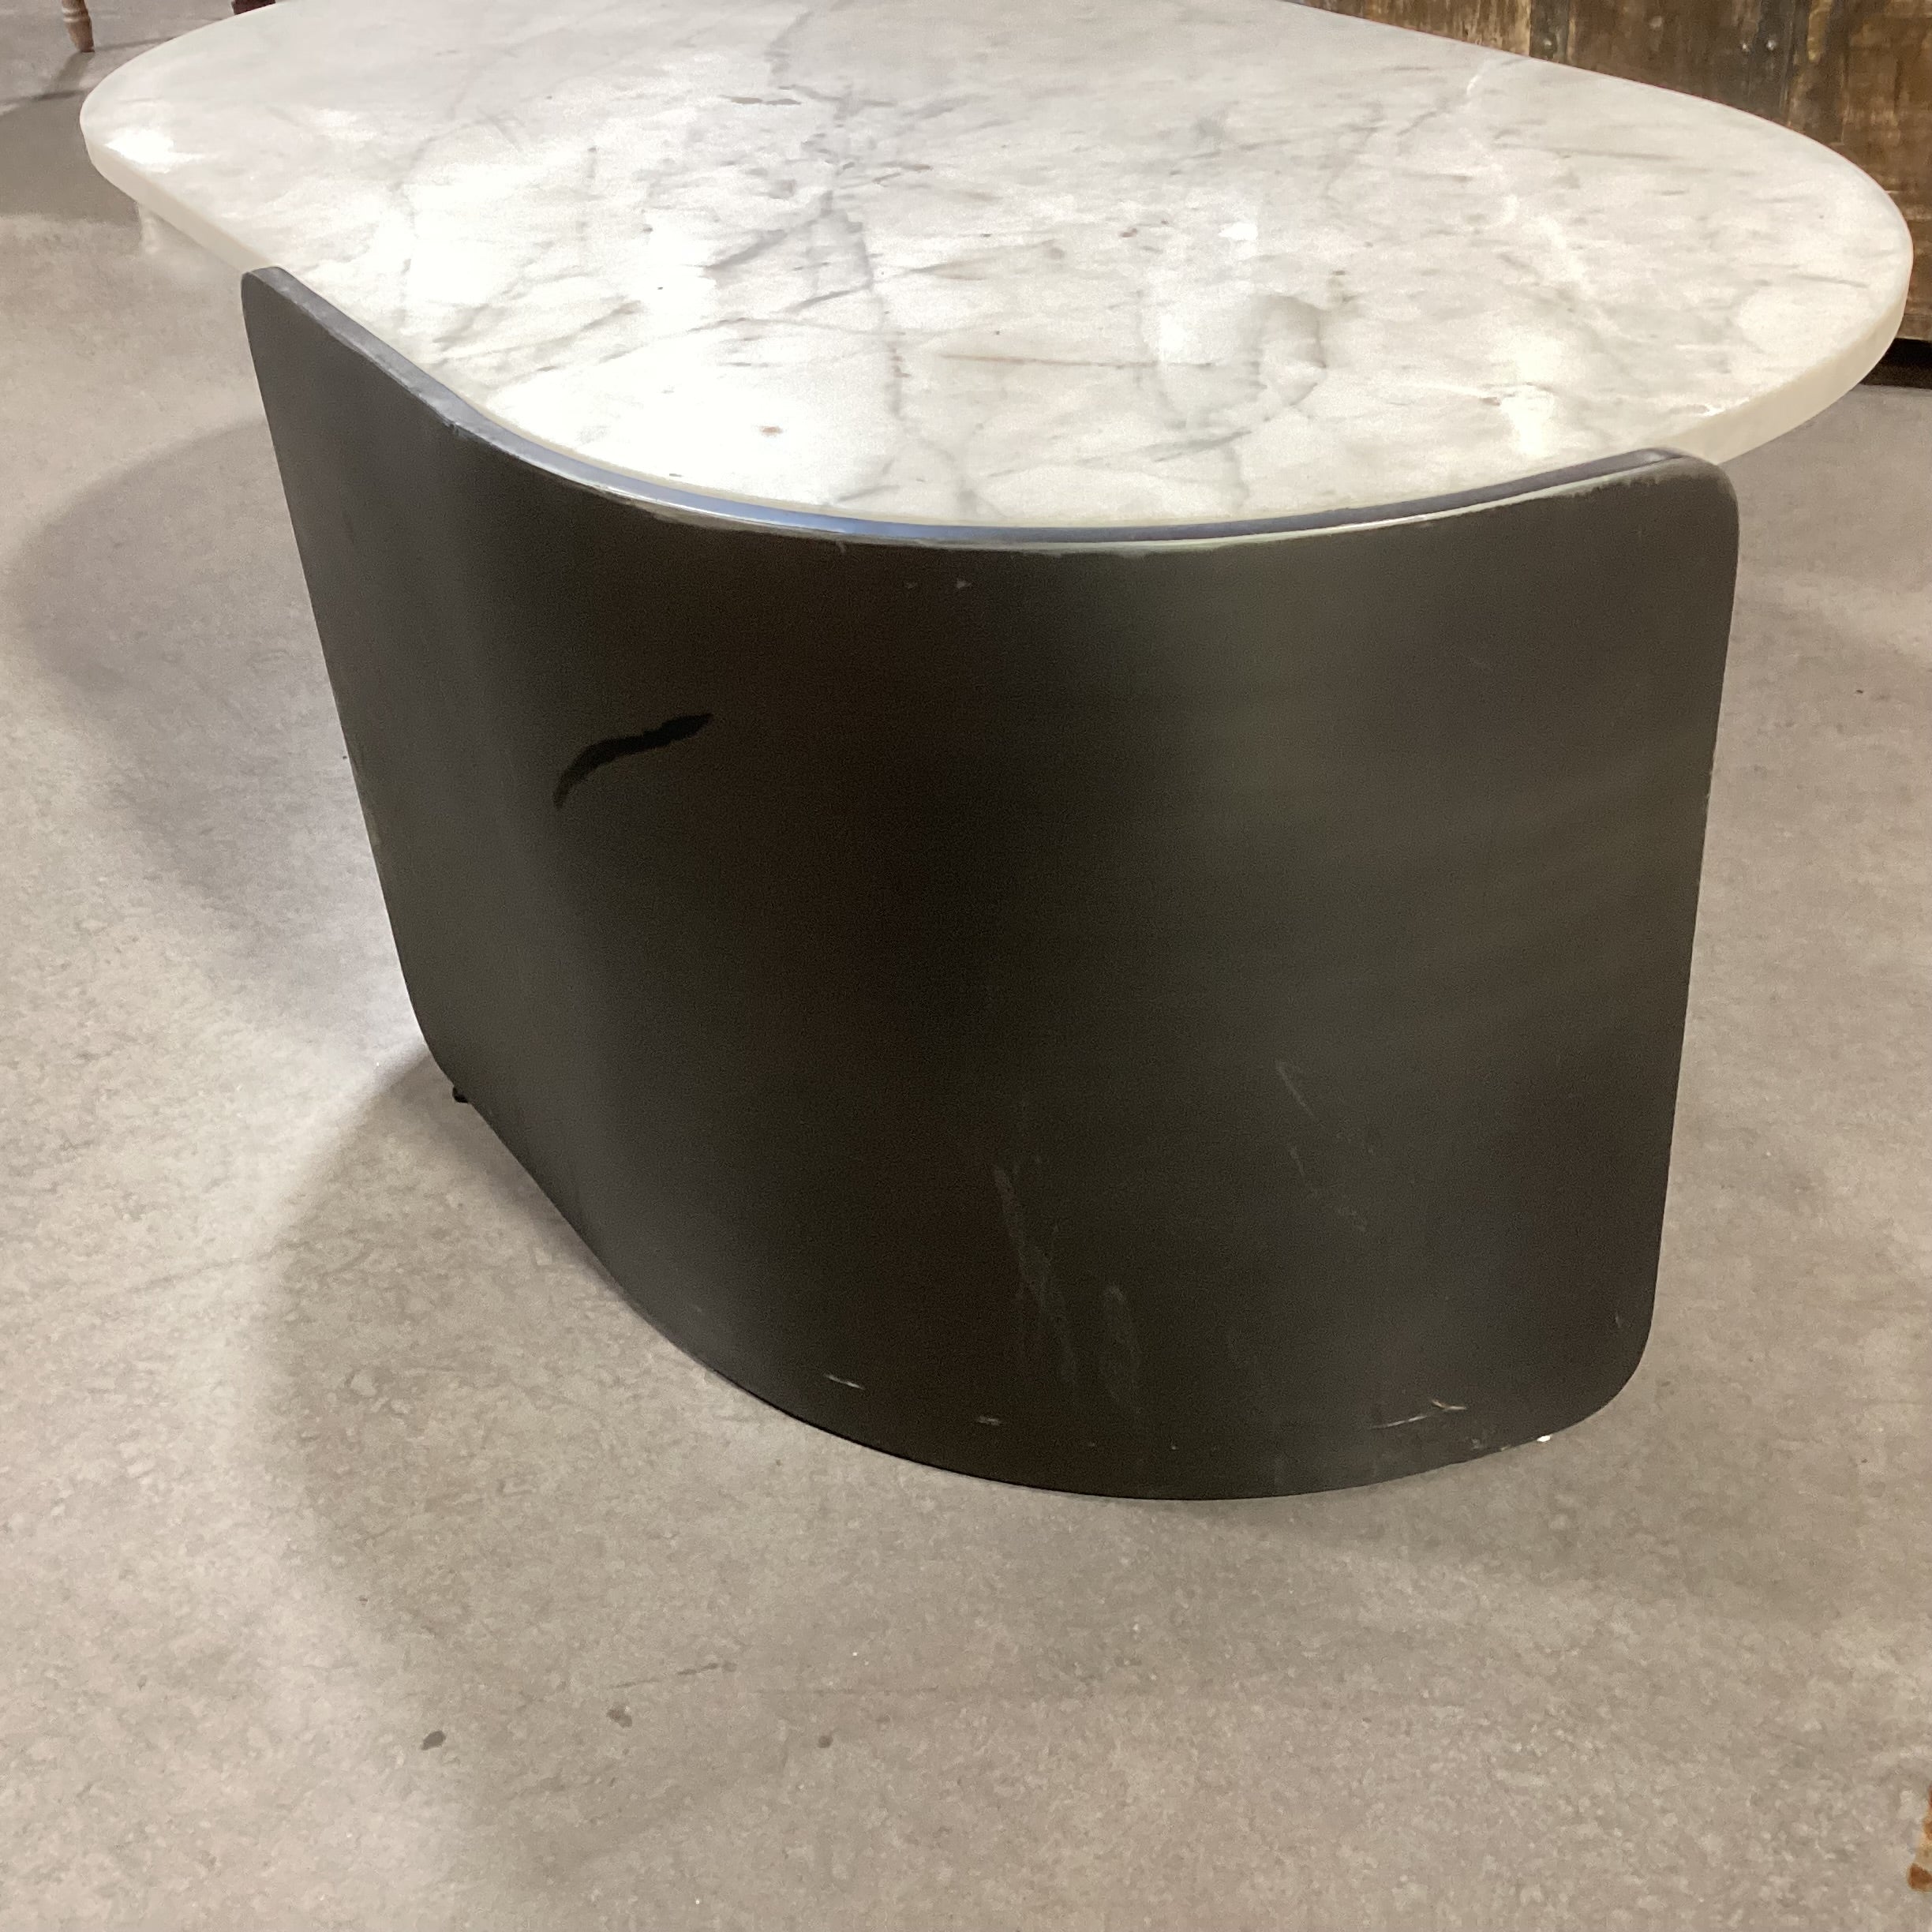 Marble & Sculptured Metal Coffee Table 44.5"x 25.5"x 17"